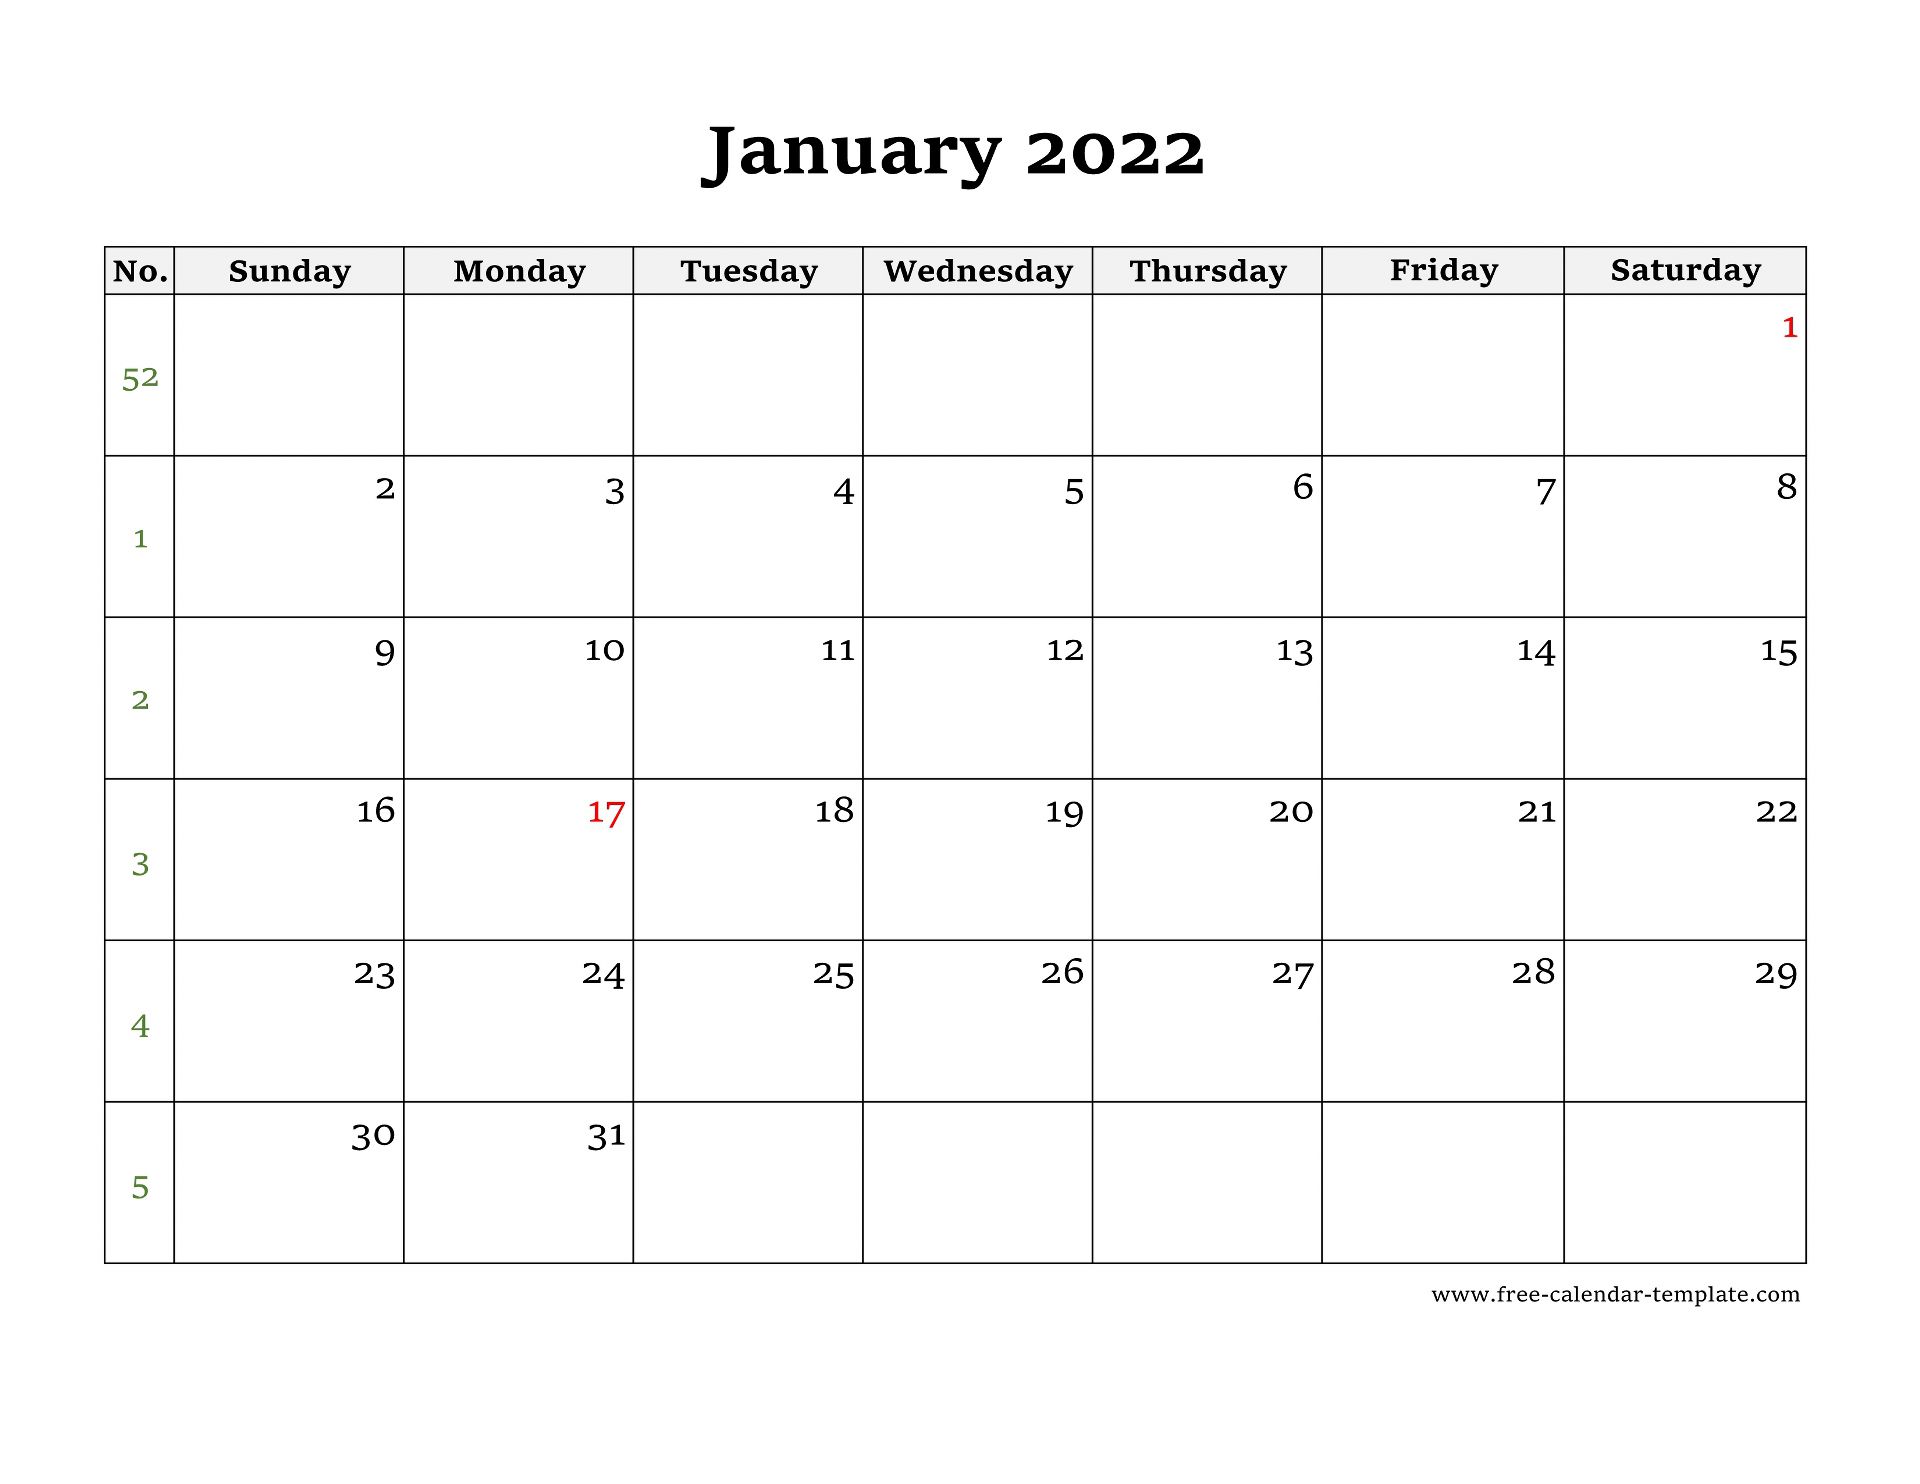 Simple Monthly Calendar 2022 large box on each day for